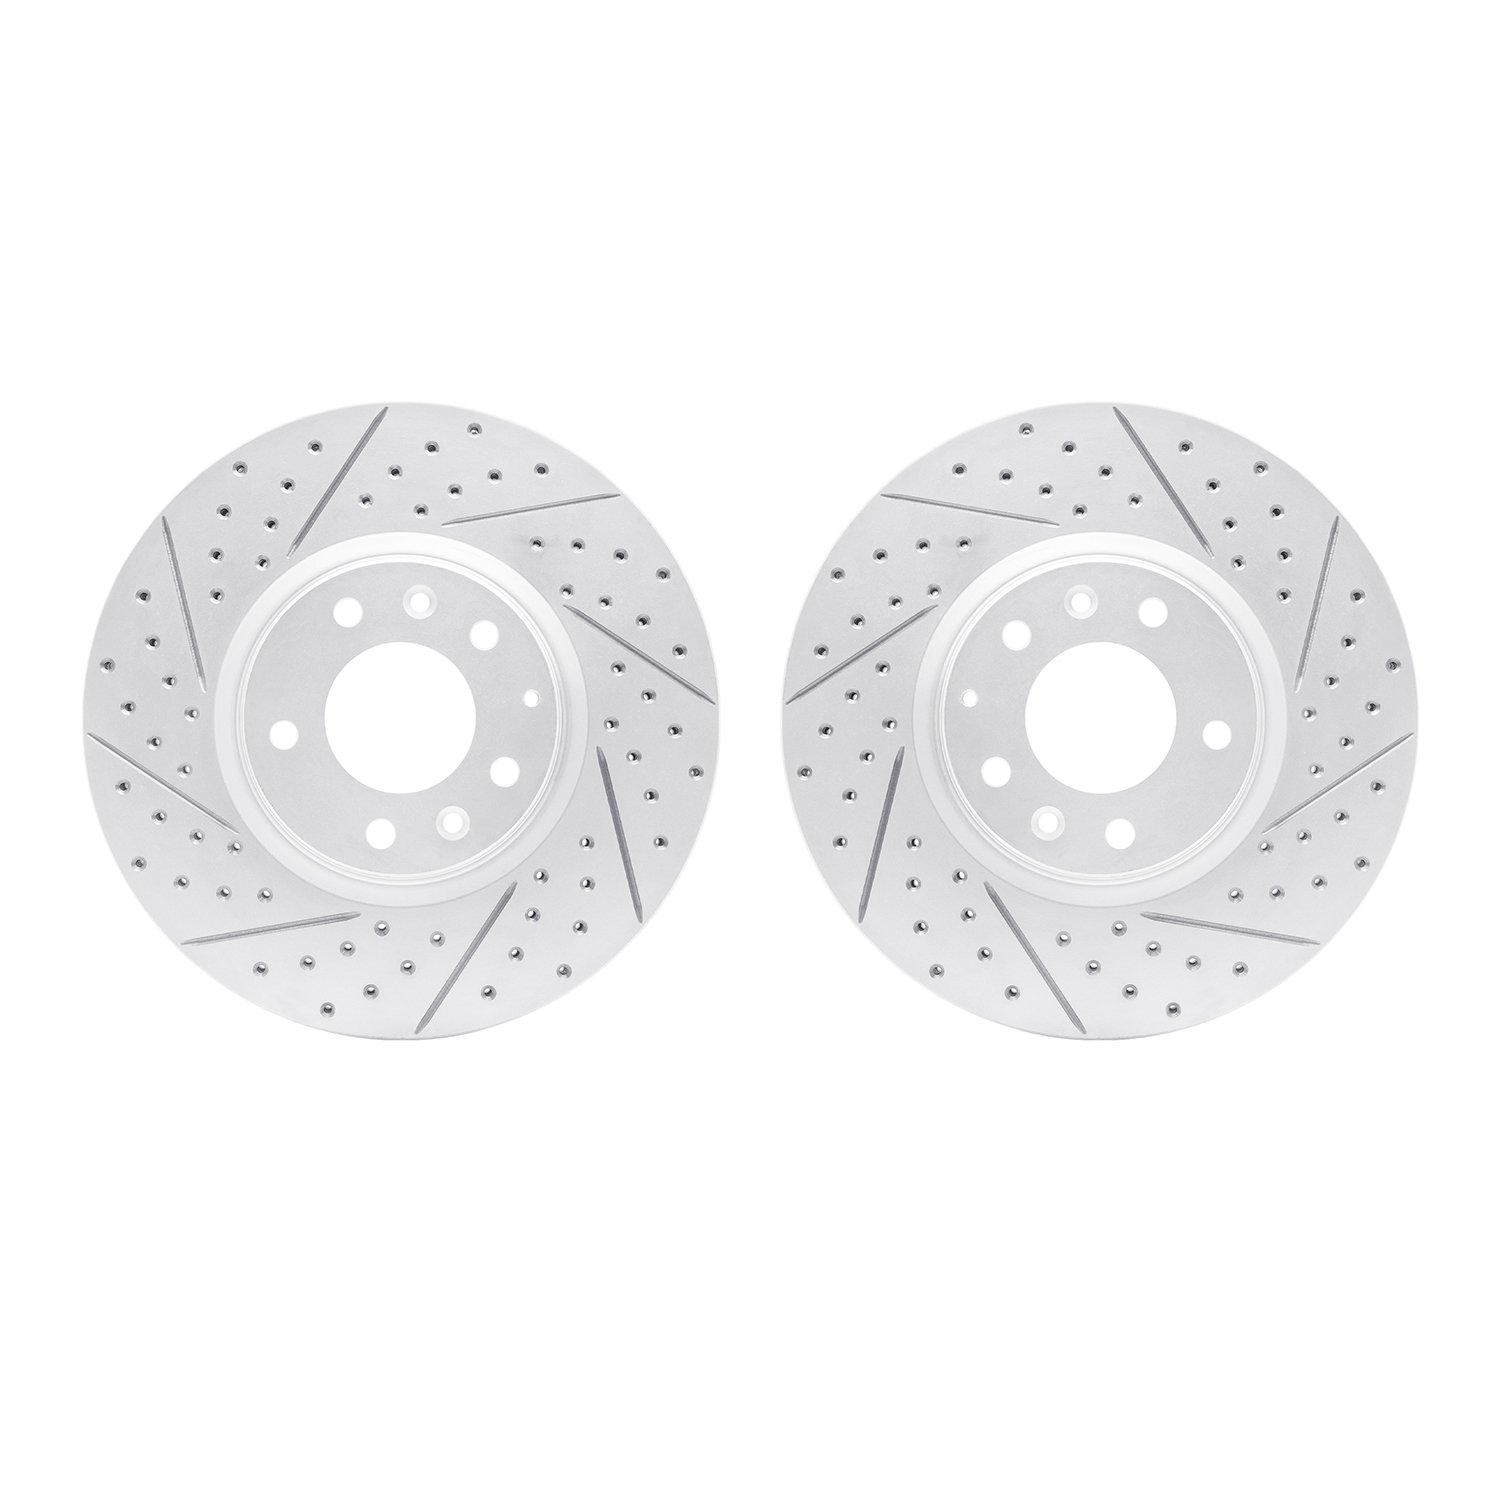 2002-80012 Geoperformance Drilled/Slotted Brake Rotors, 2006-2007 Ford/Lincoln/Mercury/Mazda, Position: Front